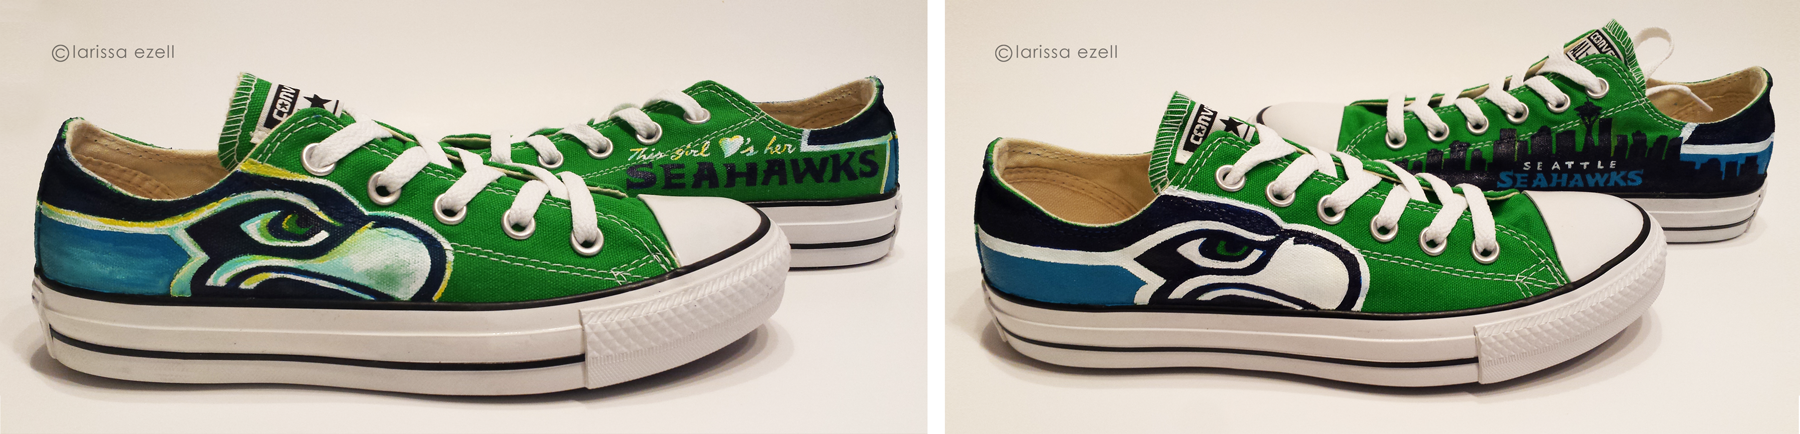 Two Sea-hawks Shoes By Larissa